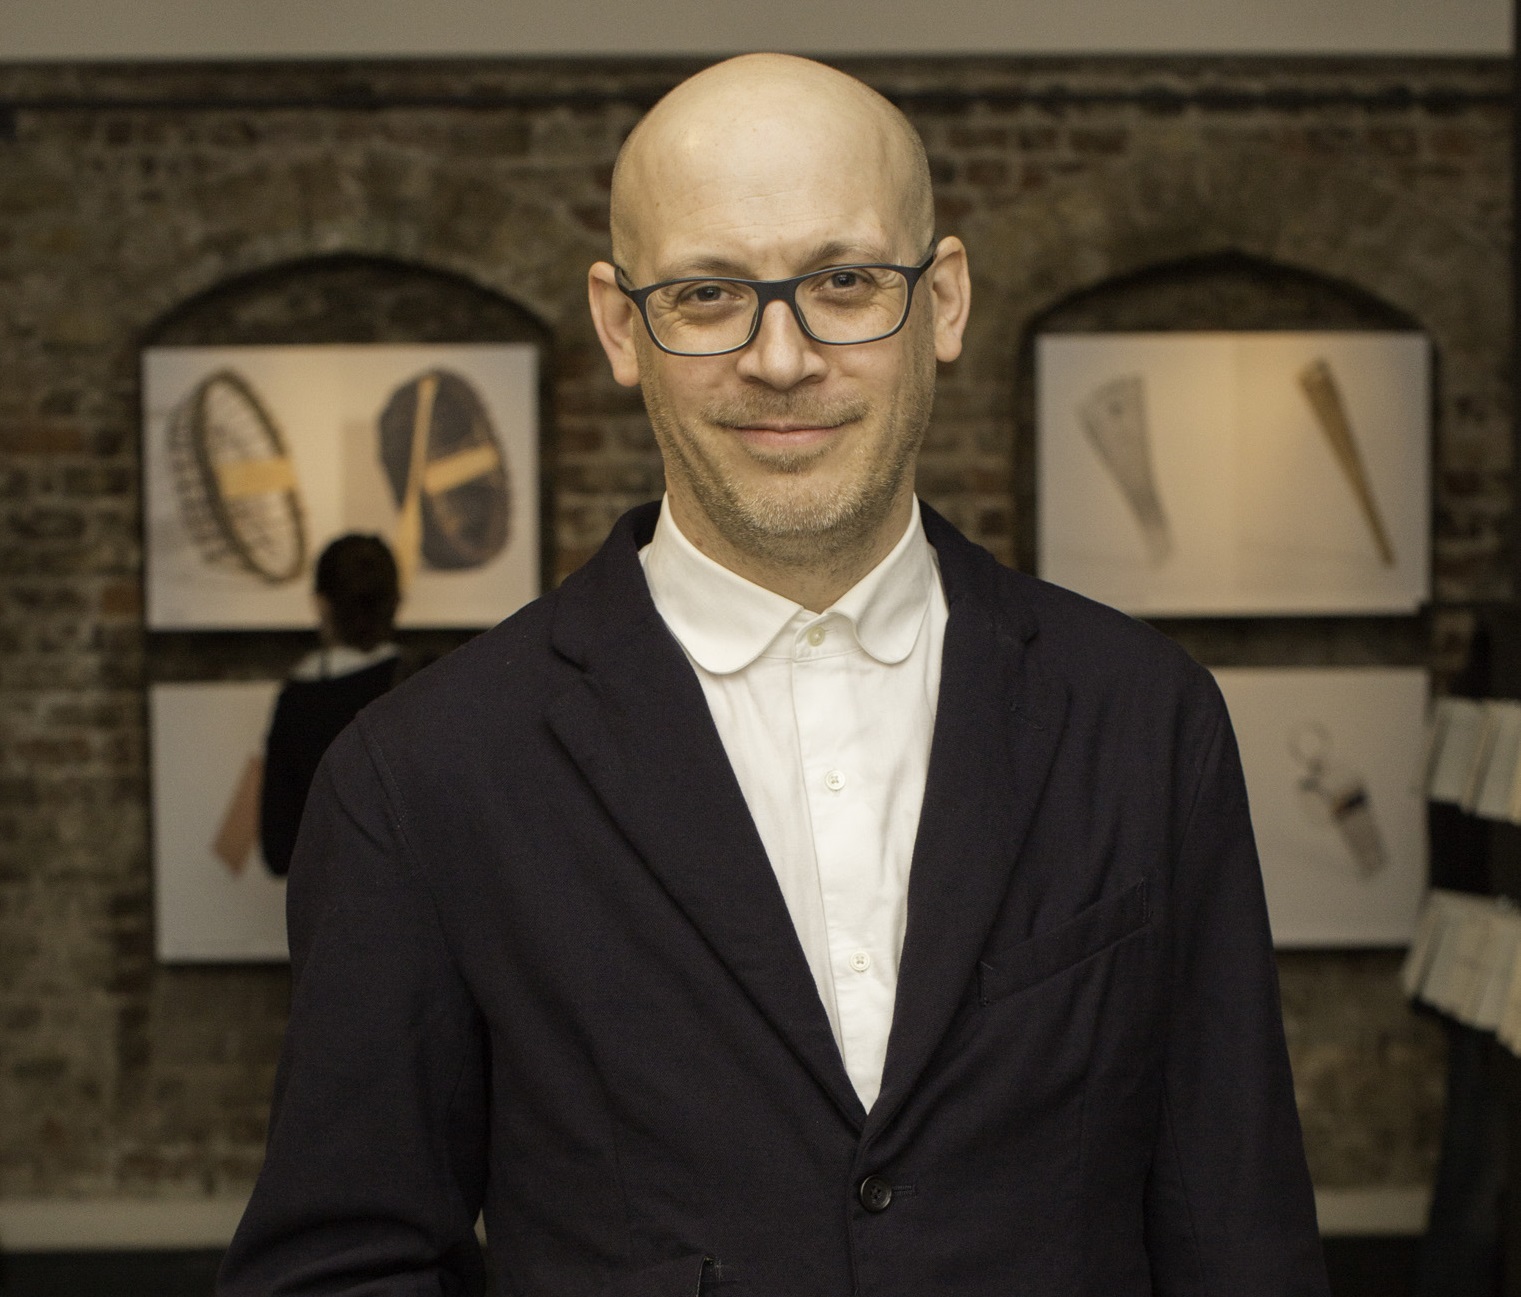 Press Release - NCAD appoints Head of School of Design